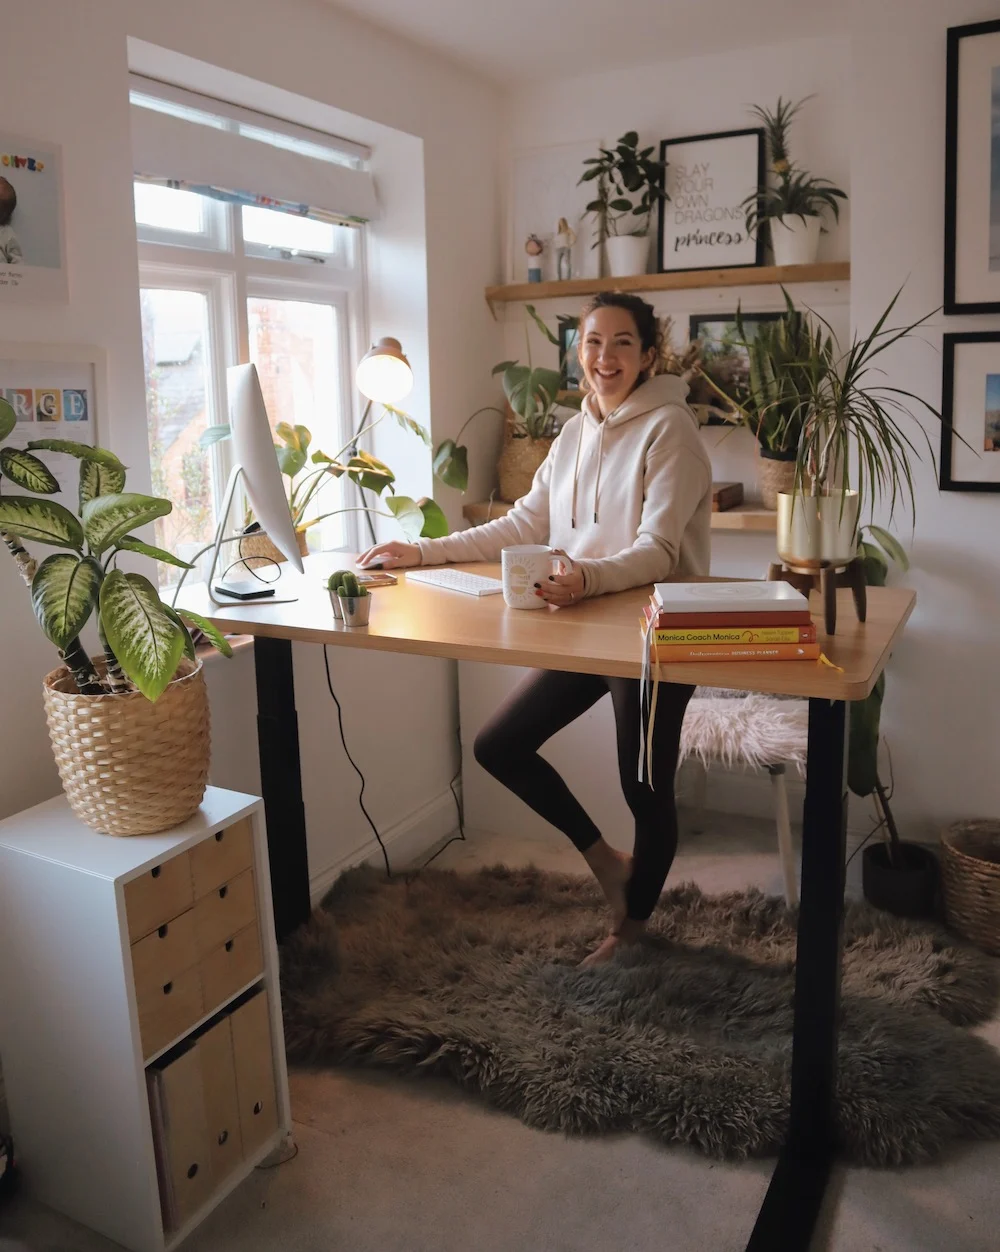 What are the physical benefits of a standing desk